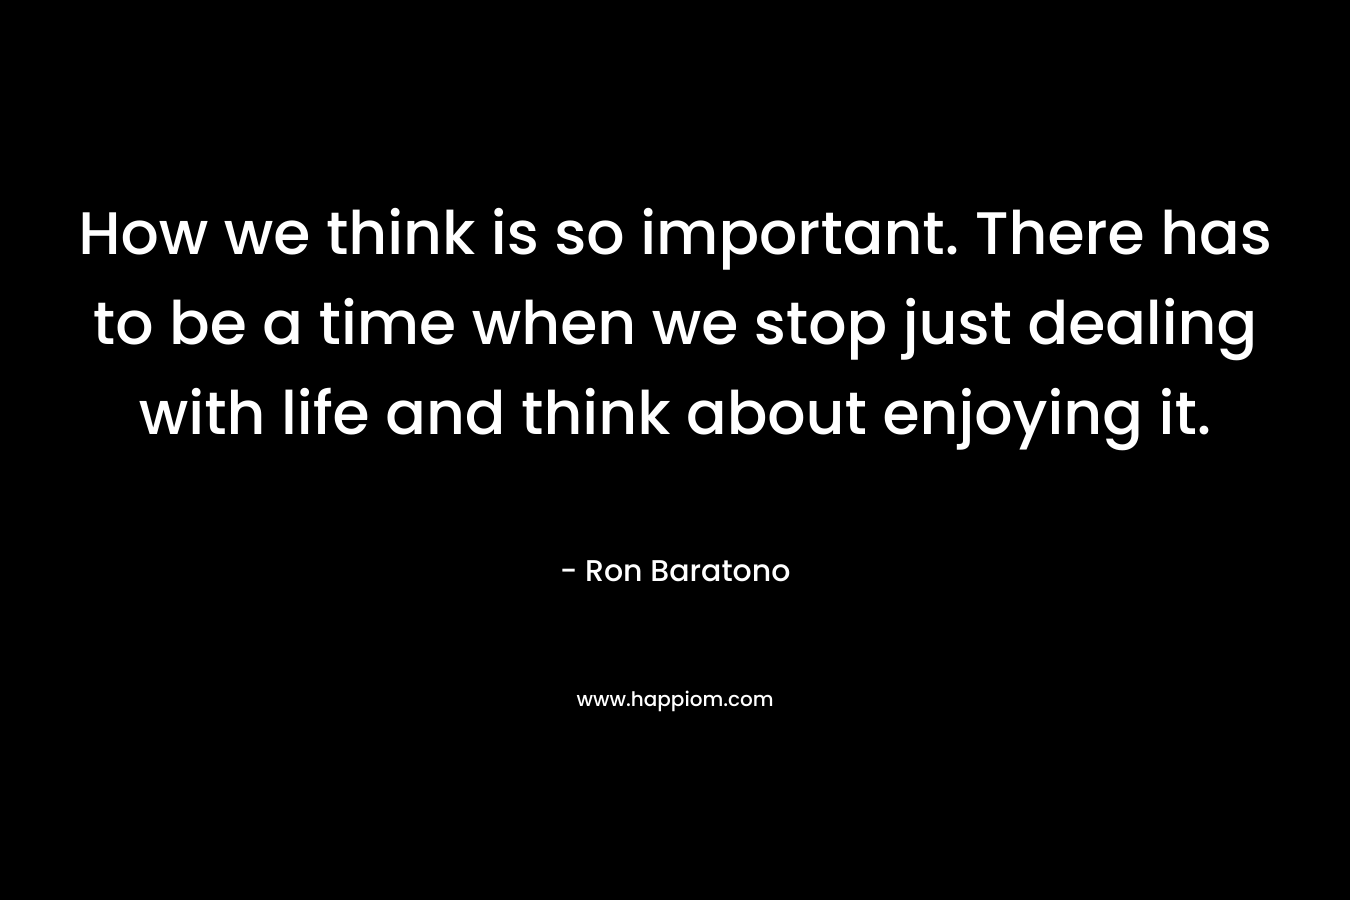 How we think is so important. There has to be a time when we stop just dealing with life and think about enjoying it.